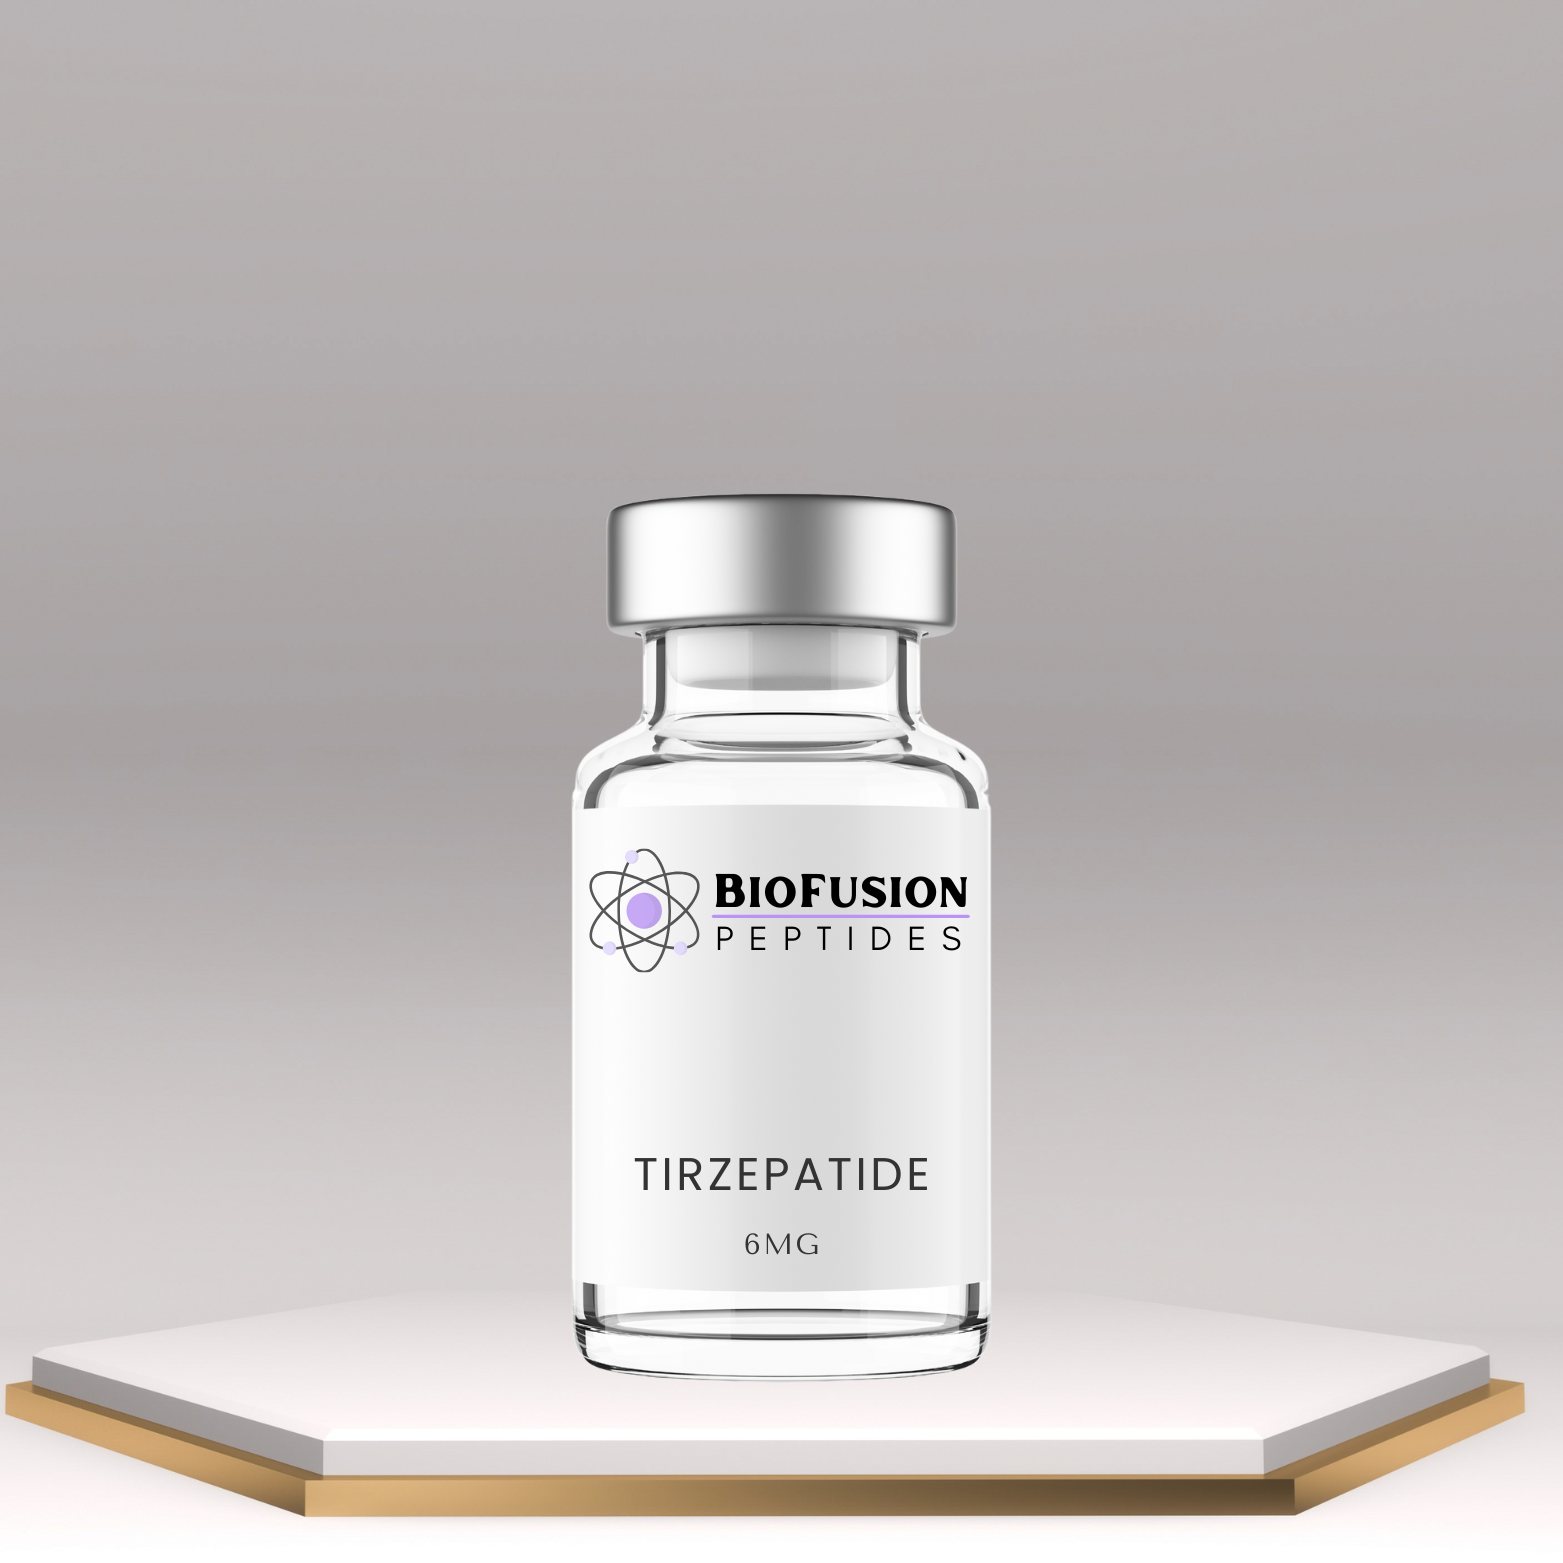 BioFusion Peptides Tirzepatide (6MG) vial